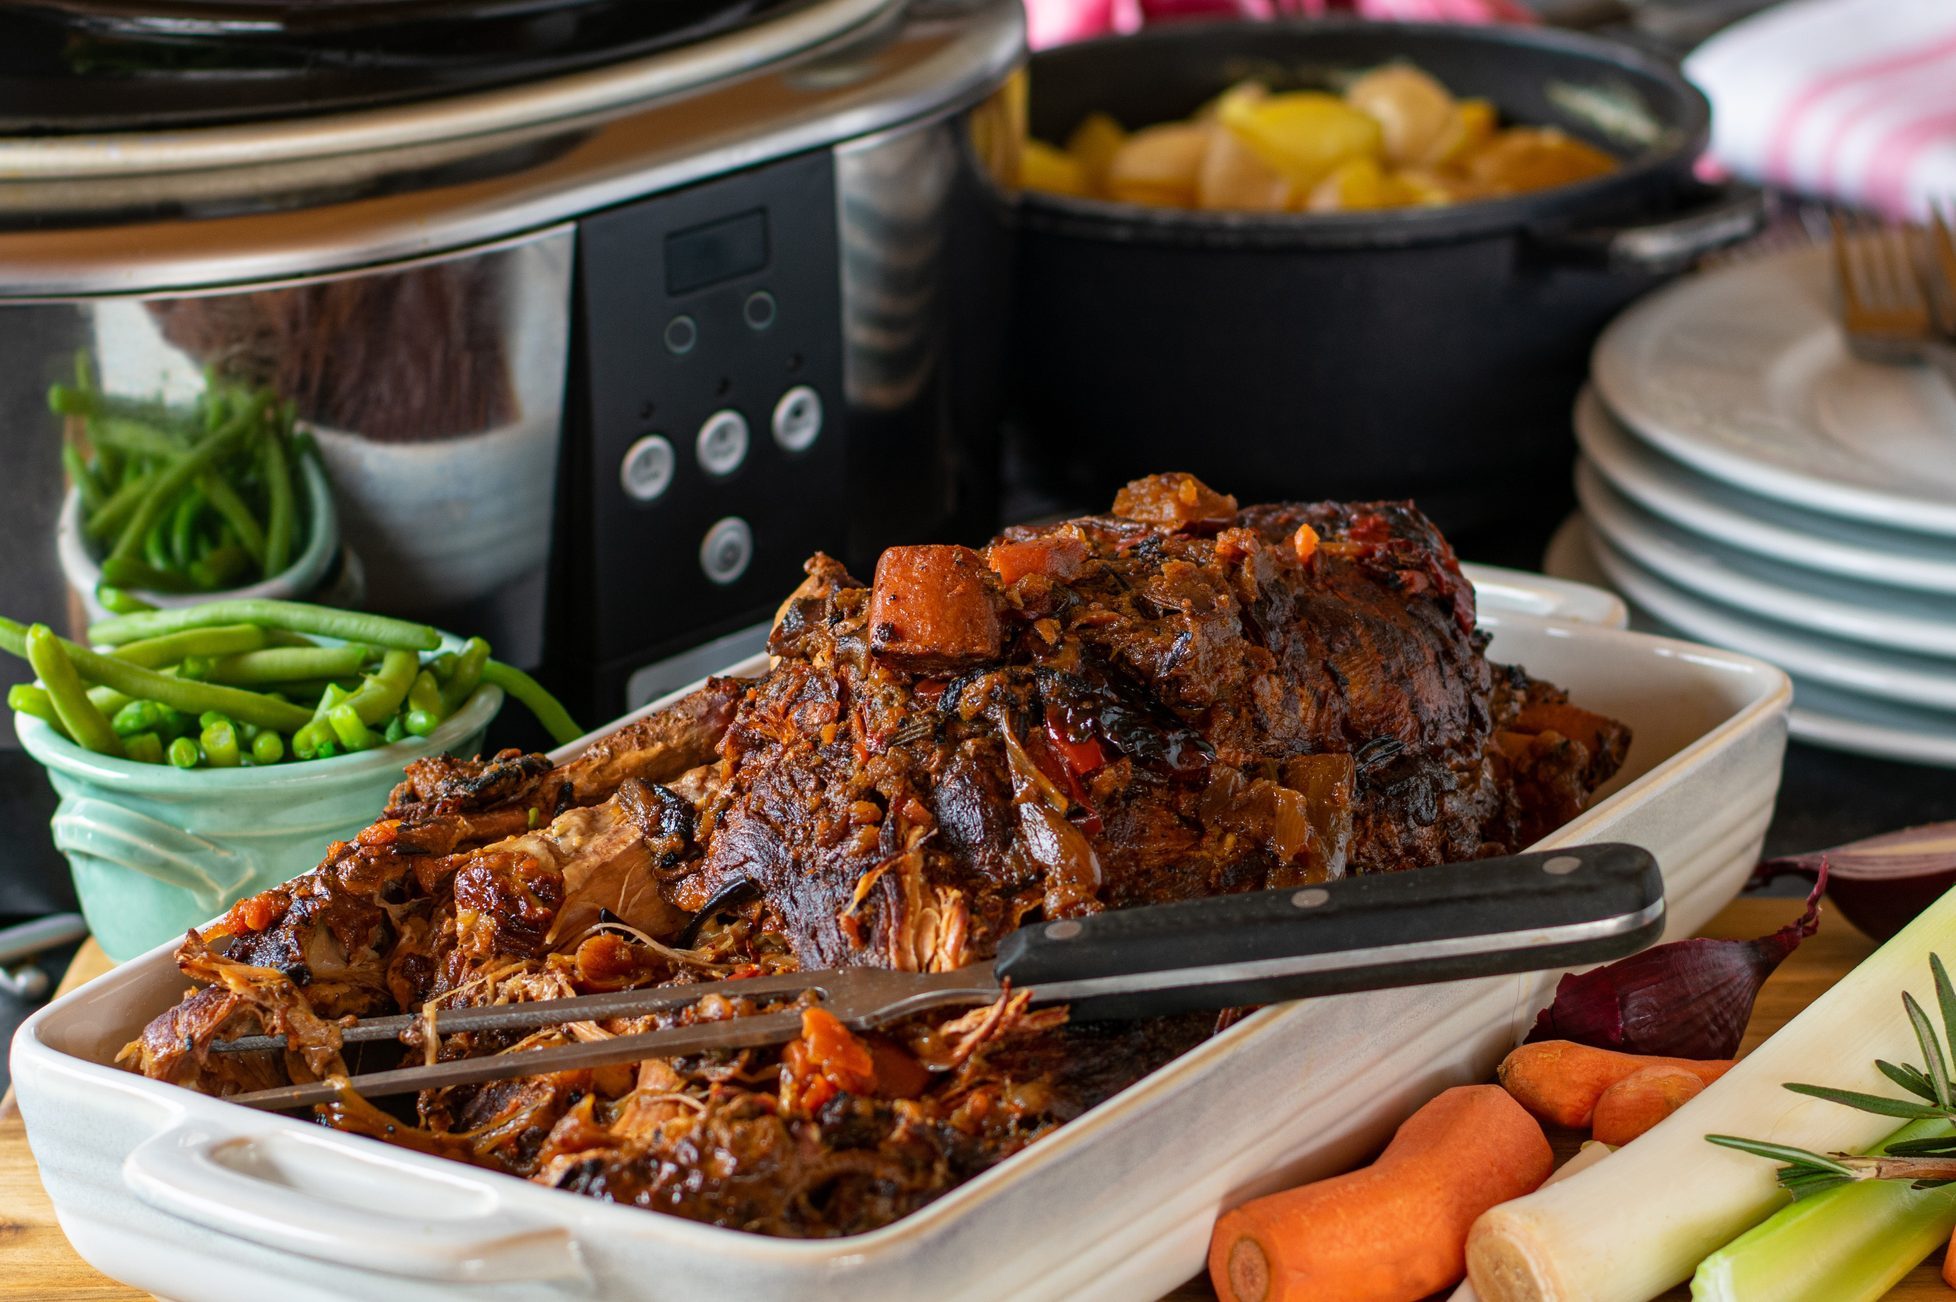 One of our favorite slow cookers is a great low price right now